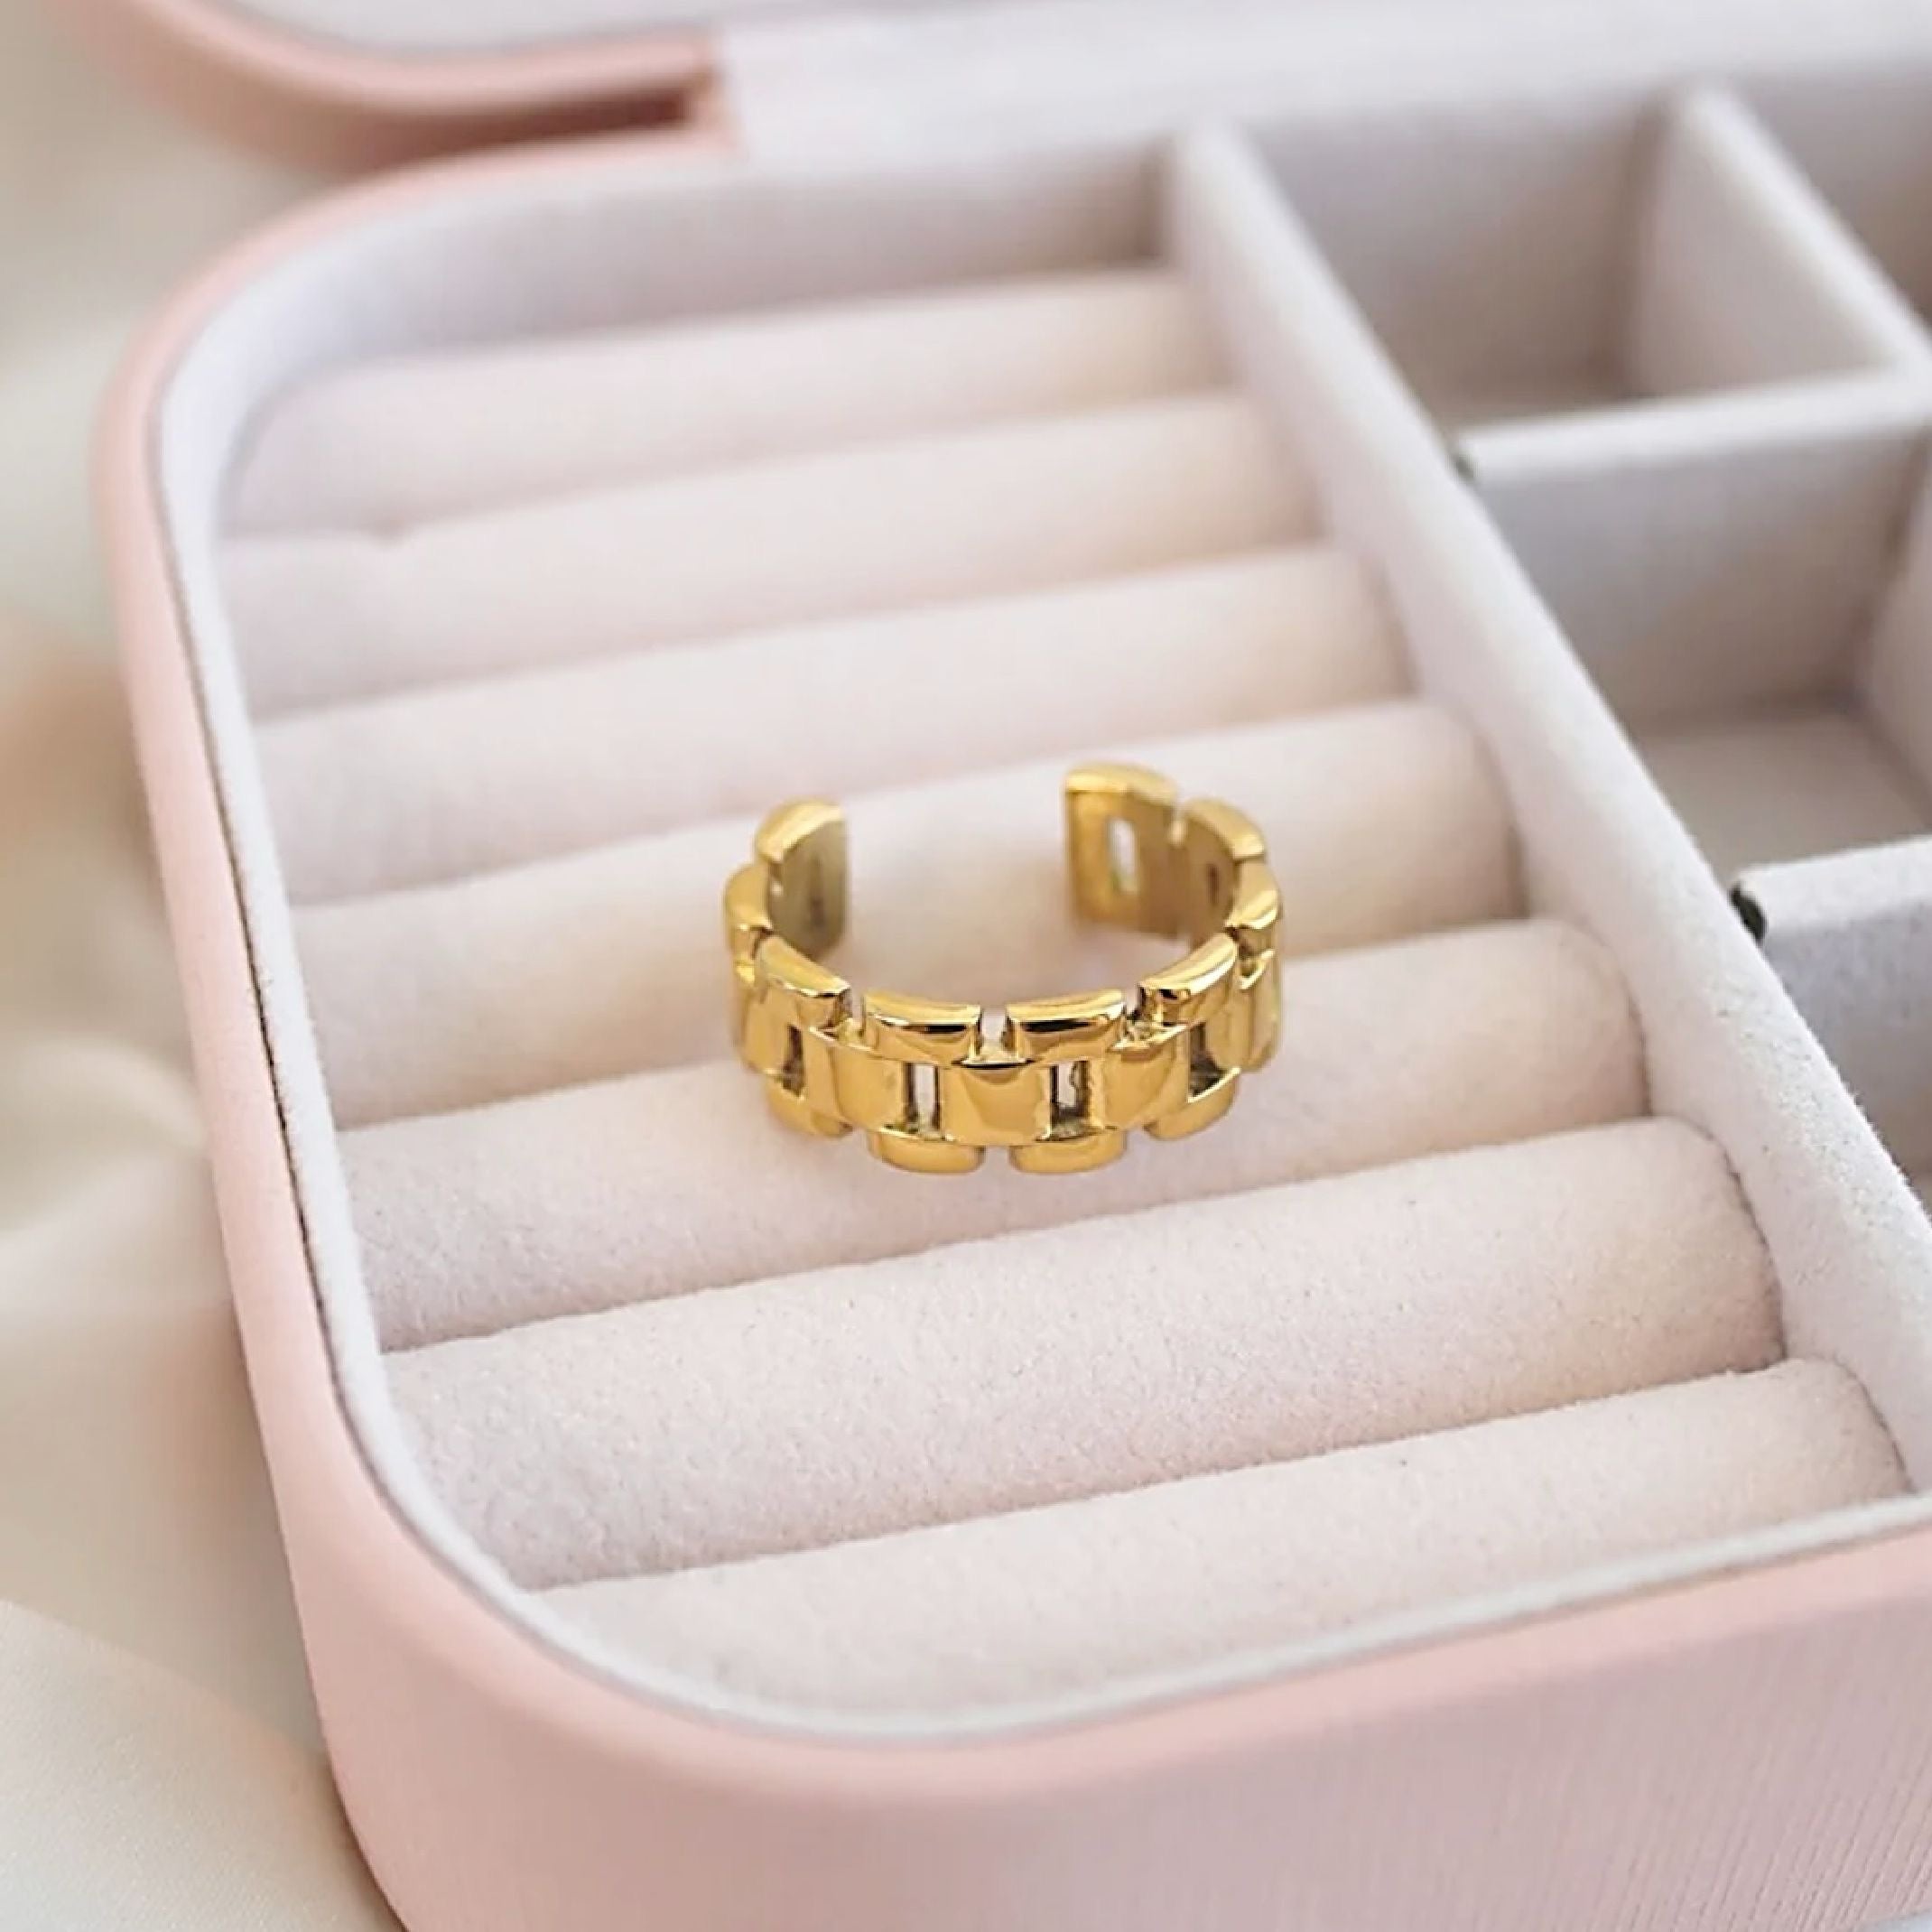 Gold watch strap ring 